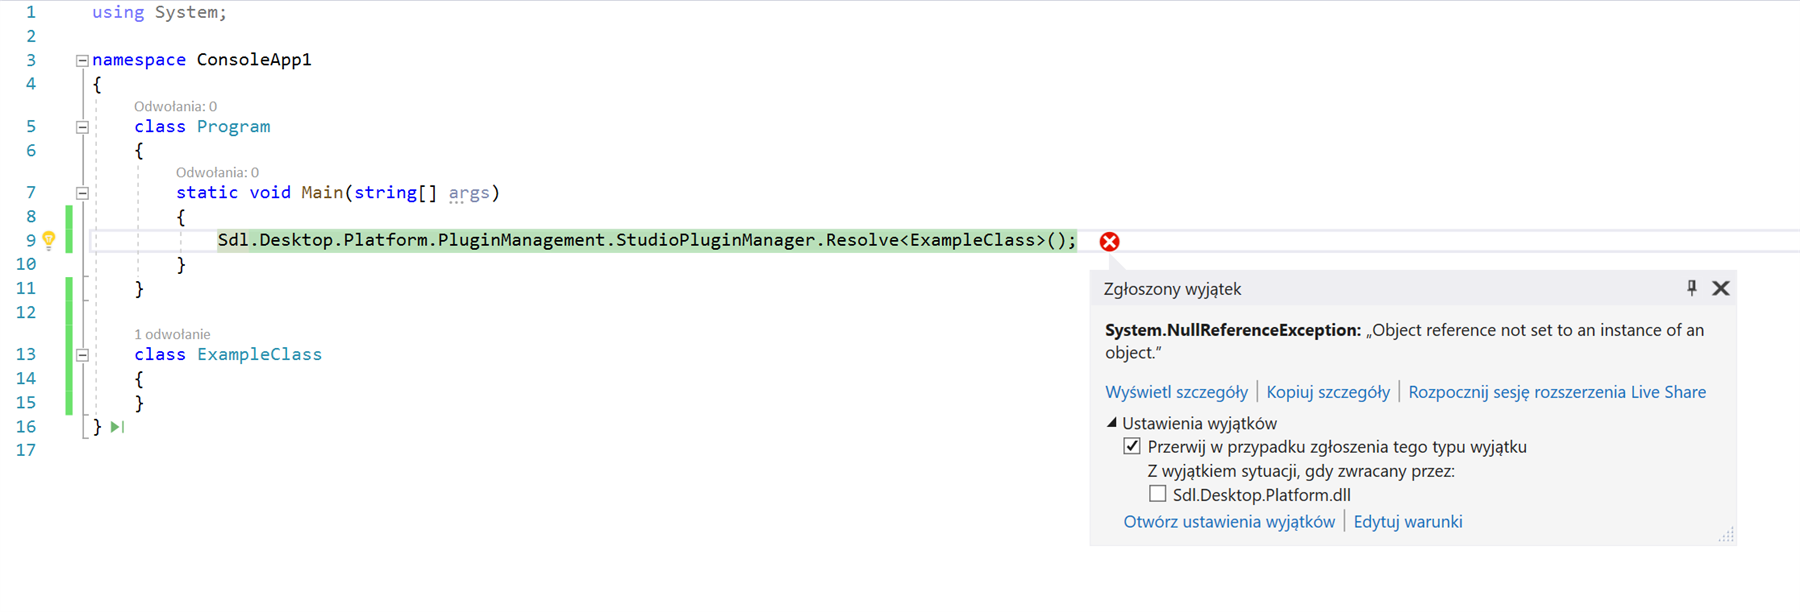 Screenshot of code in Visual Studio showing an error message 'System.NullReferenceException: Object reference not set to an instance of an object.' in Sdl.Desktop.Platform.PluginManagement.StudioPluginManager.Resolve method.